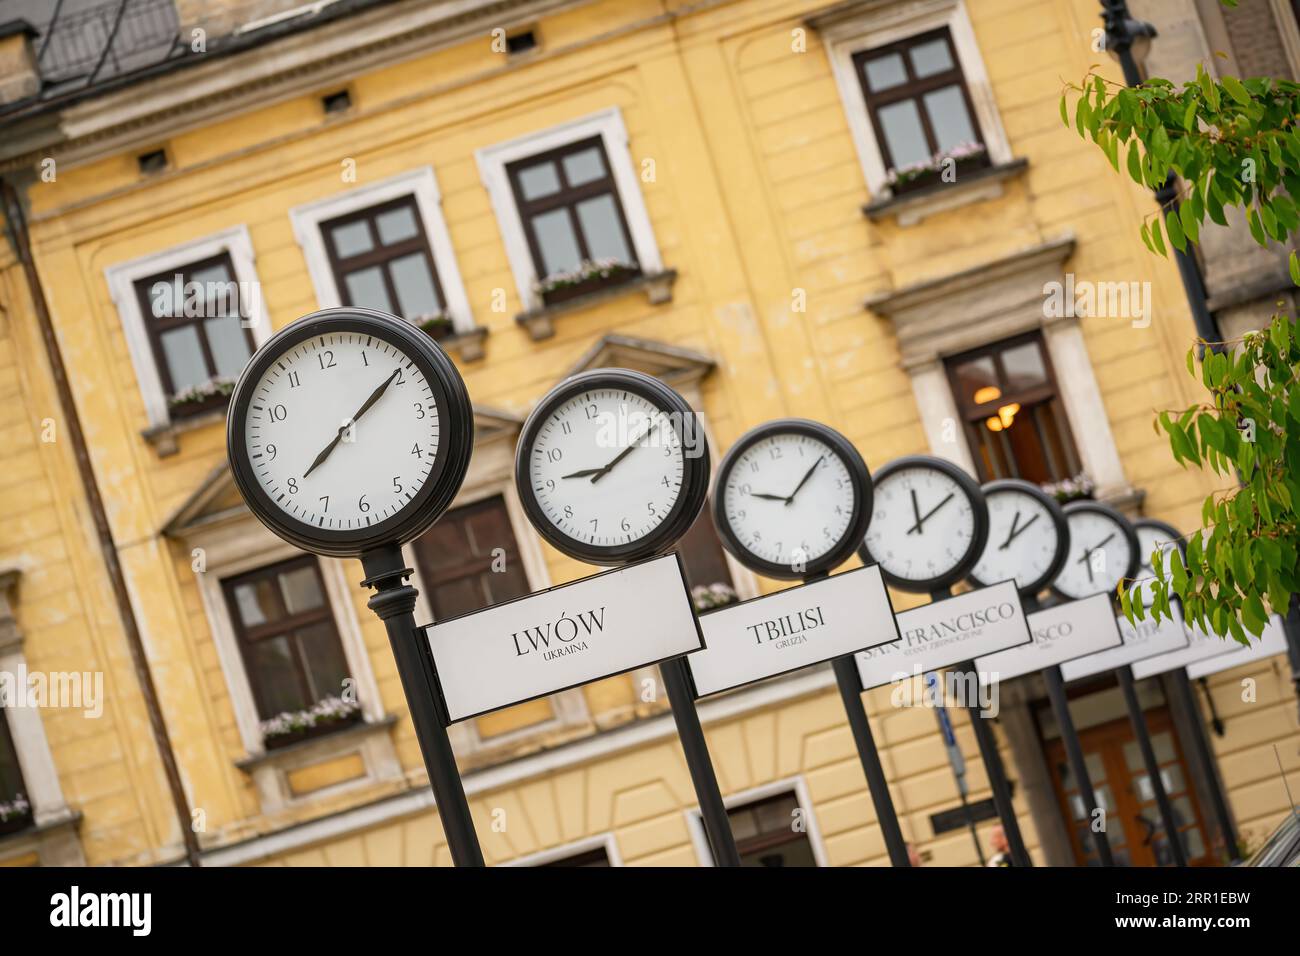 Clocks showing the current time in different cities around the world. Holy Ghost square in Krakow, Poland Stock Photo